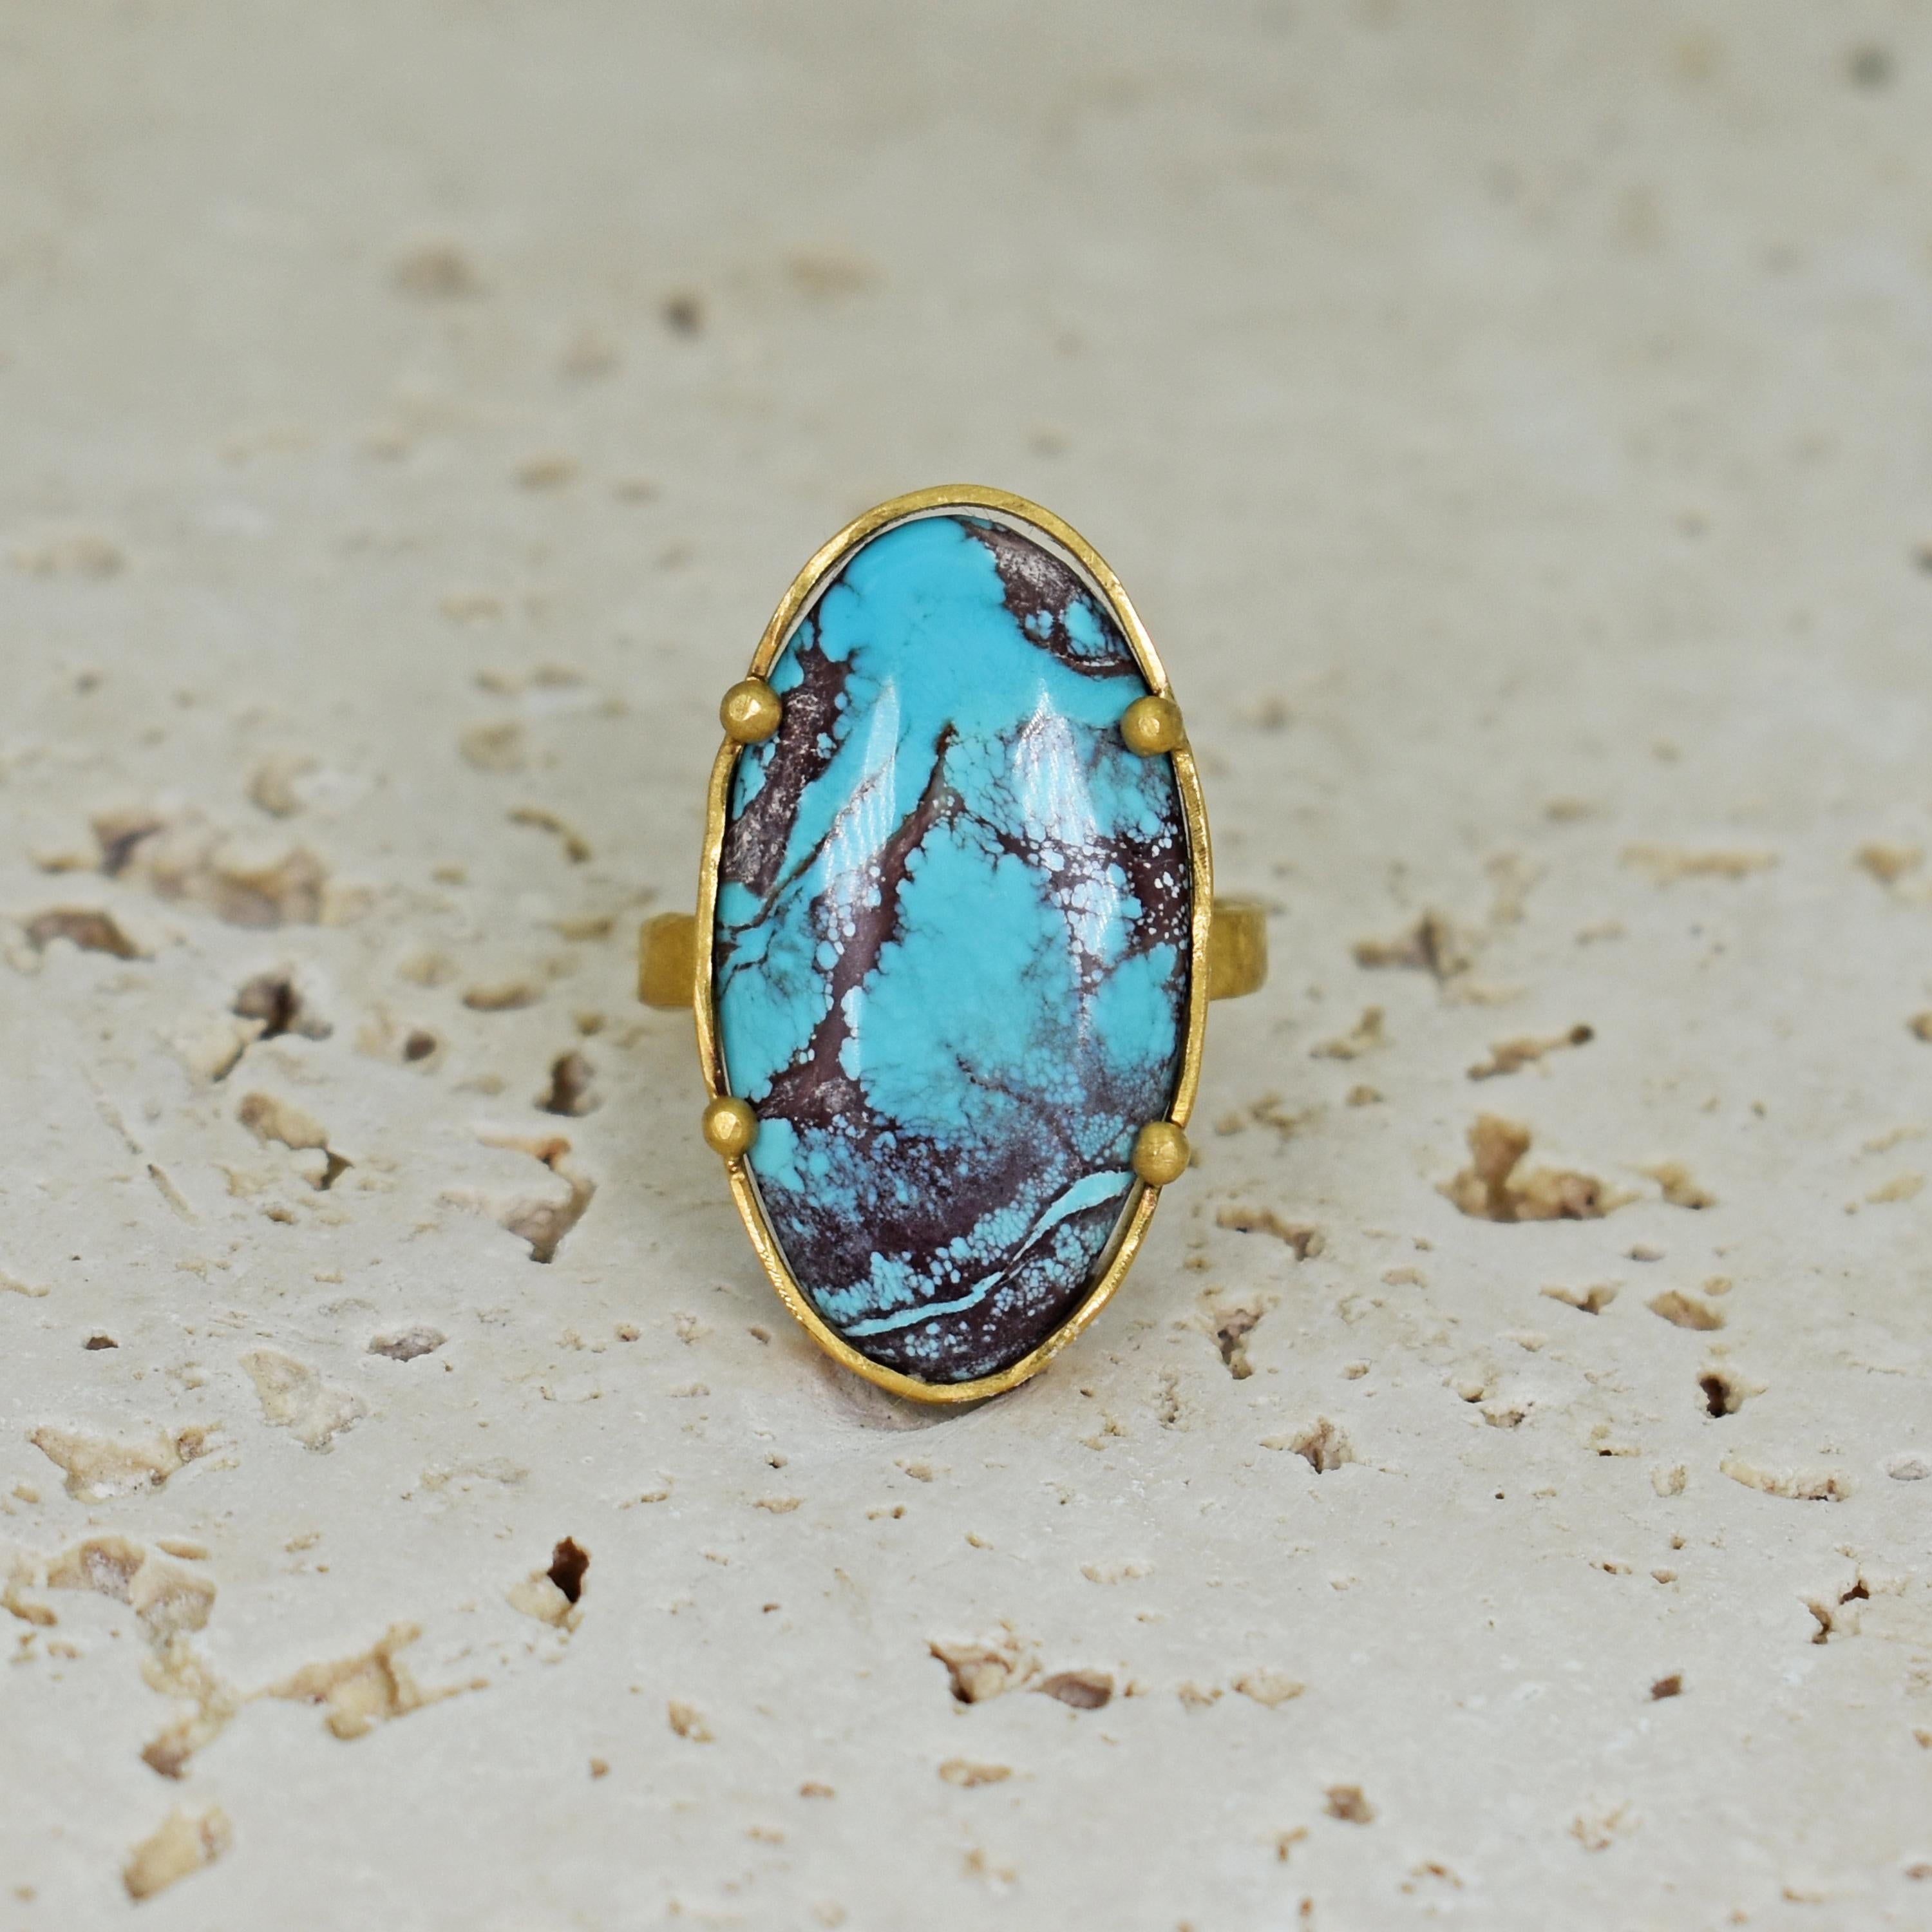 bisbee turquoise for sale